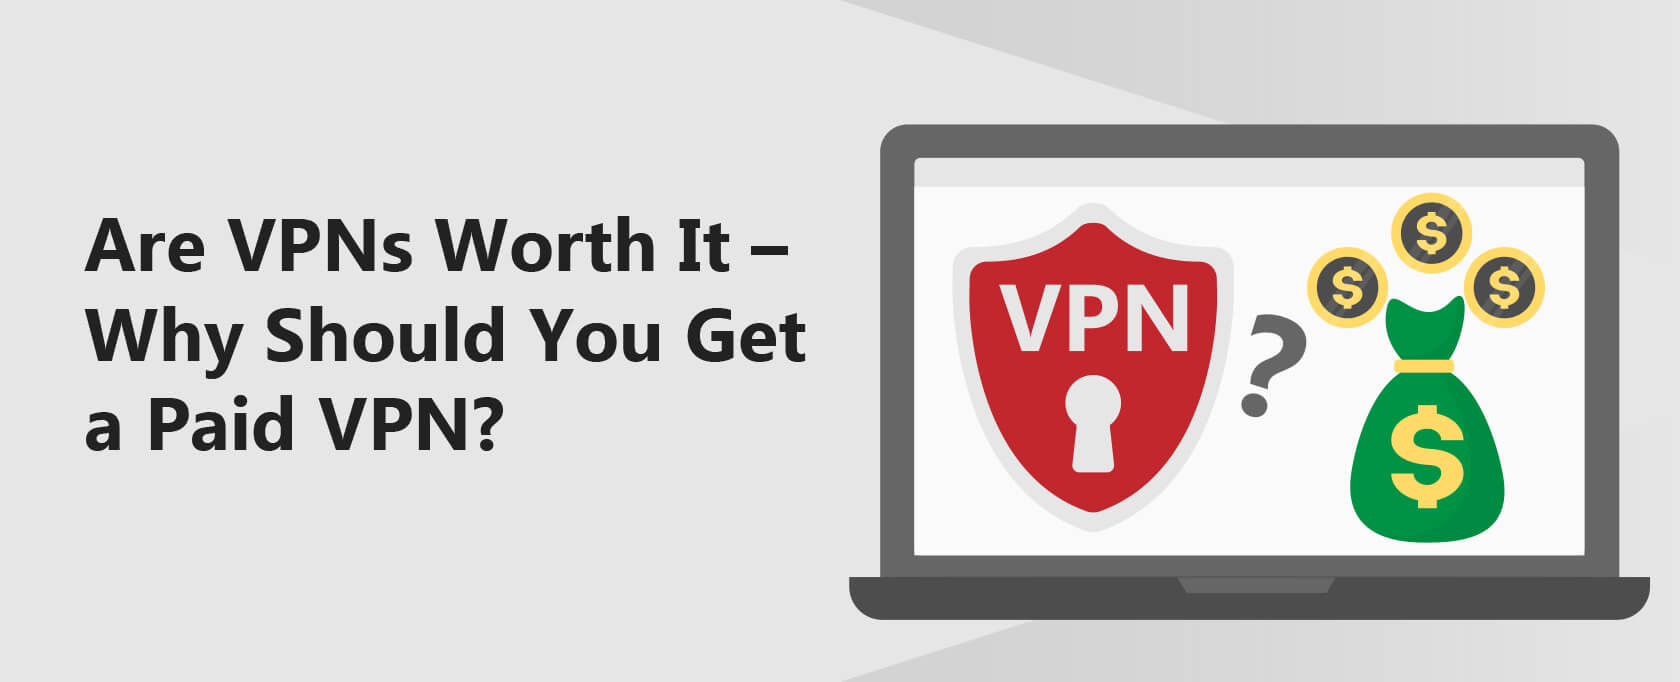 Are VPNs Worth It – Why Should You Get a Paid VPN?